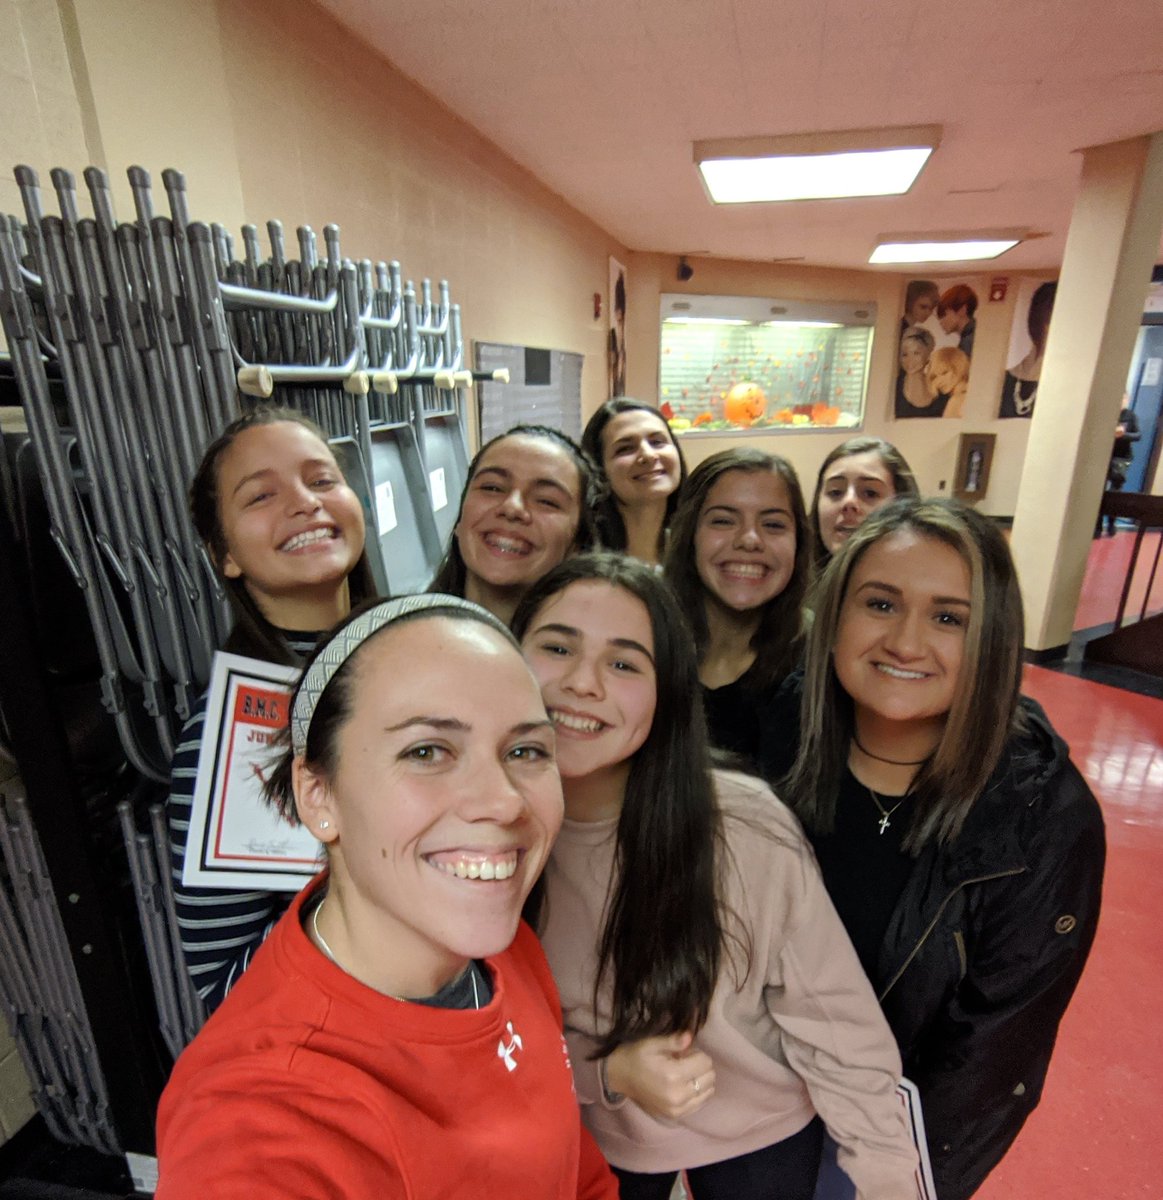 That's a wrap! Good luck to all the seniors, you will be missed! It's been an awesome year with a great group of girls! Already can't wait for next season! @durfee_fh @DurfeeAthletics 🏑🖤❤️ #durfeepride #foldingchairs